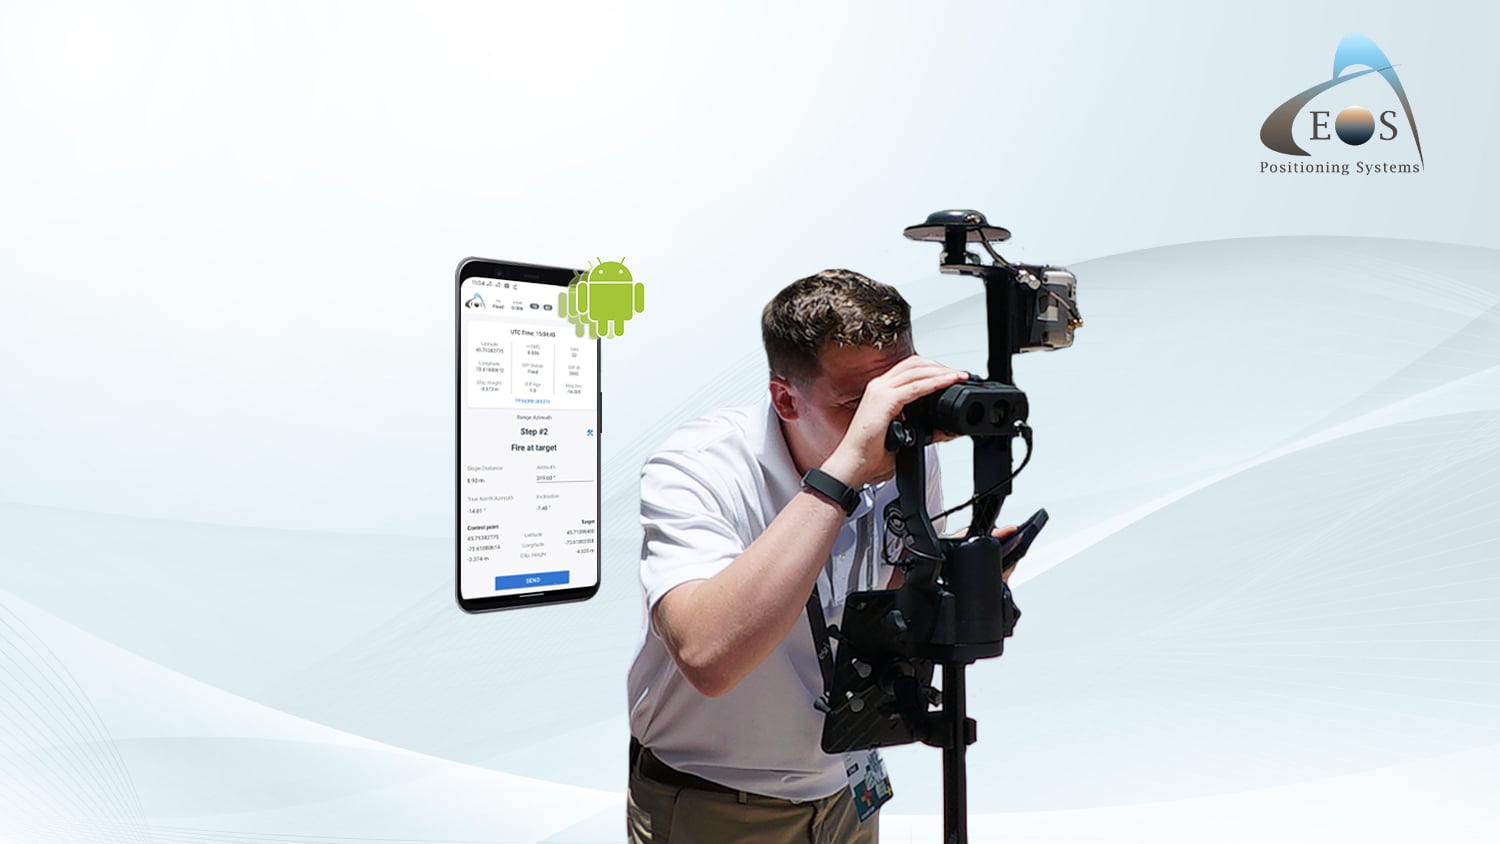 Professionals may now capture high-accuracy laser offsets directly into ArcGIS Field Maps® on Android devices with Arrow Series® GNSS receivers